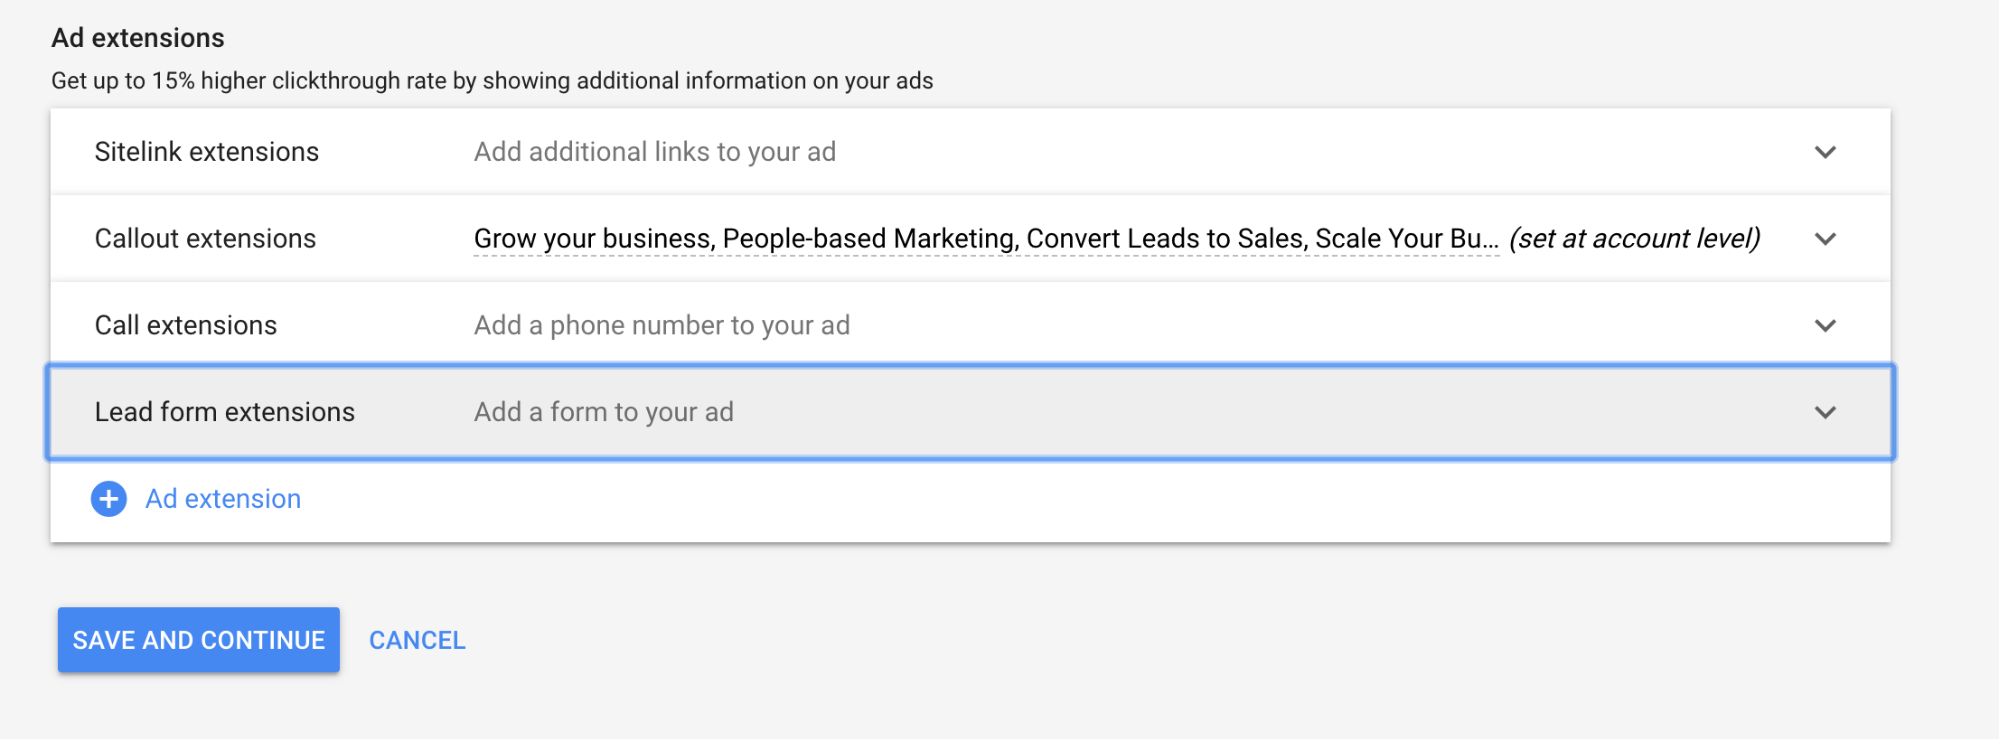 Everything You Need to Know About Google Ads Lead Forms